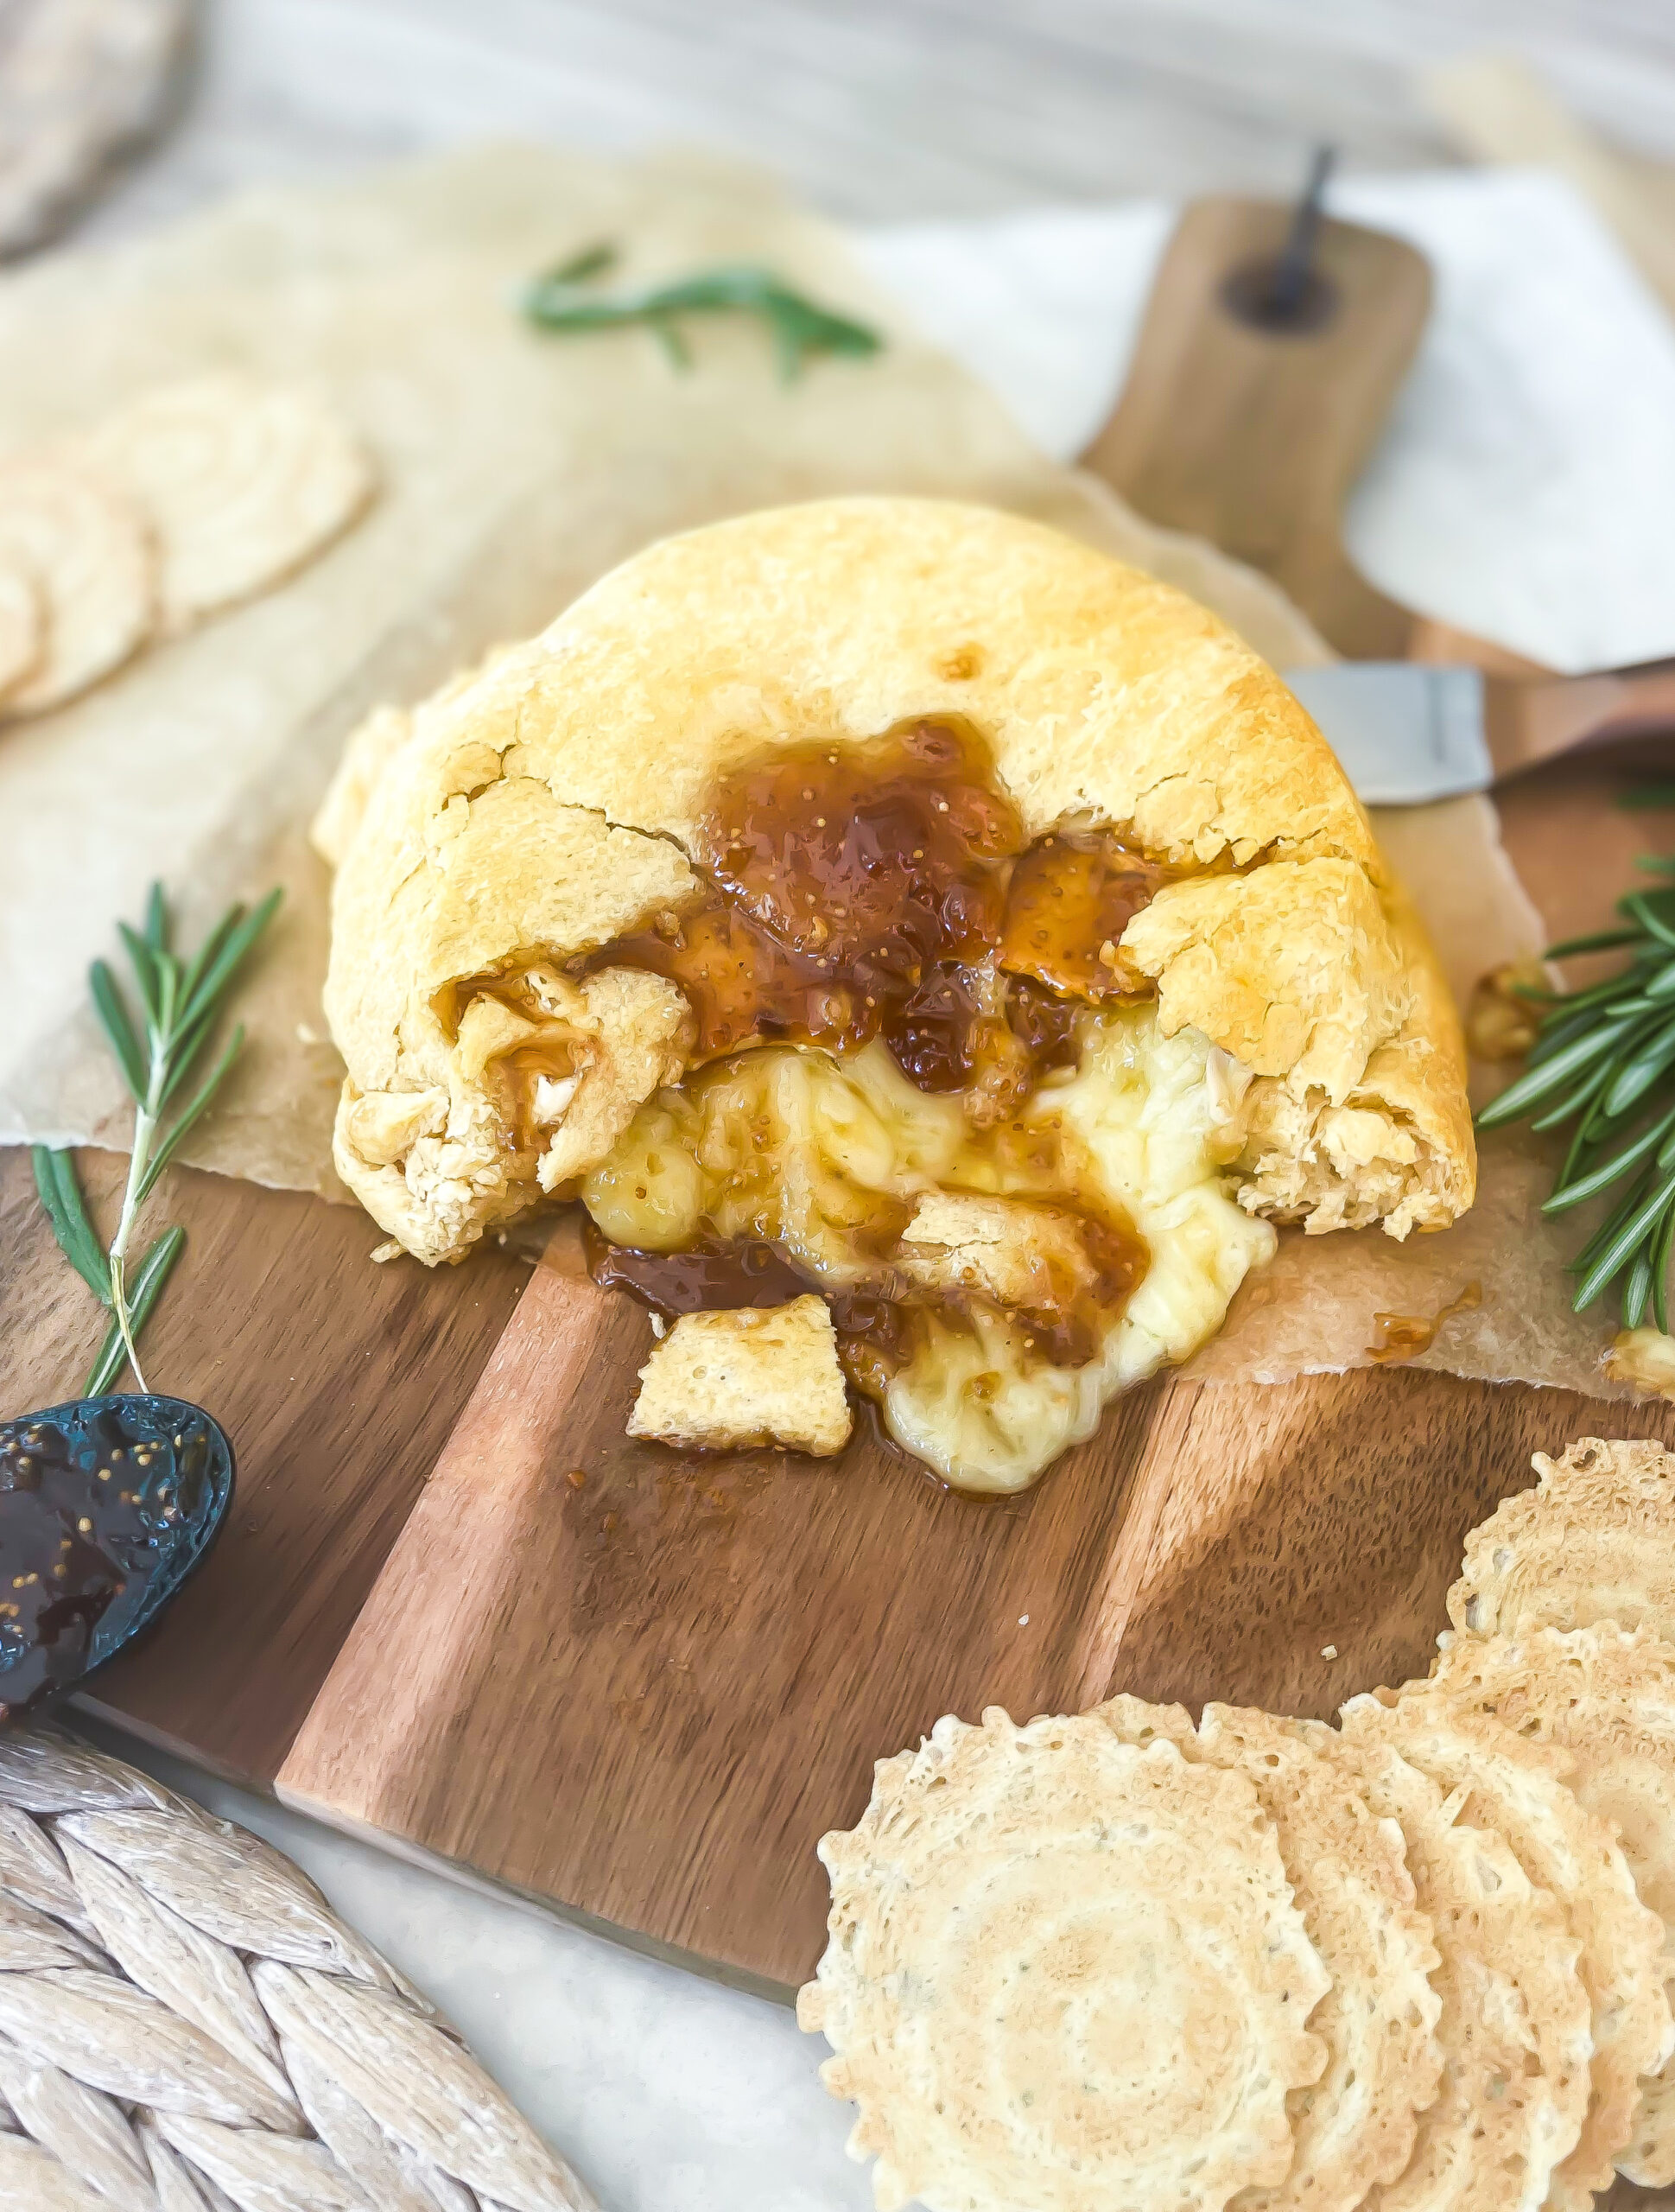 This Easy Fig Jam Baked Brie Recipe is just 3 ingredients and comes together in less than 20 minutes making it a quick and easy appetizer. This is a Crescent Roll Dough Sheet Recipe using crescent rolls, brie cheese and fig jam | kirstenturk.com